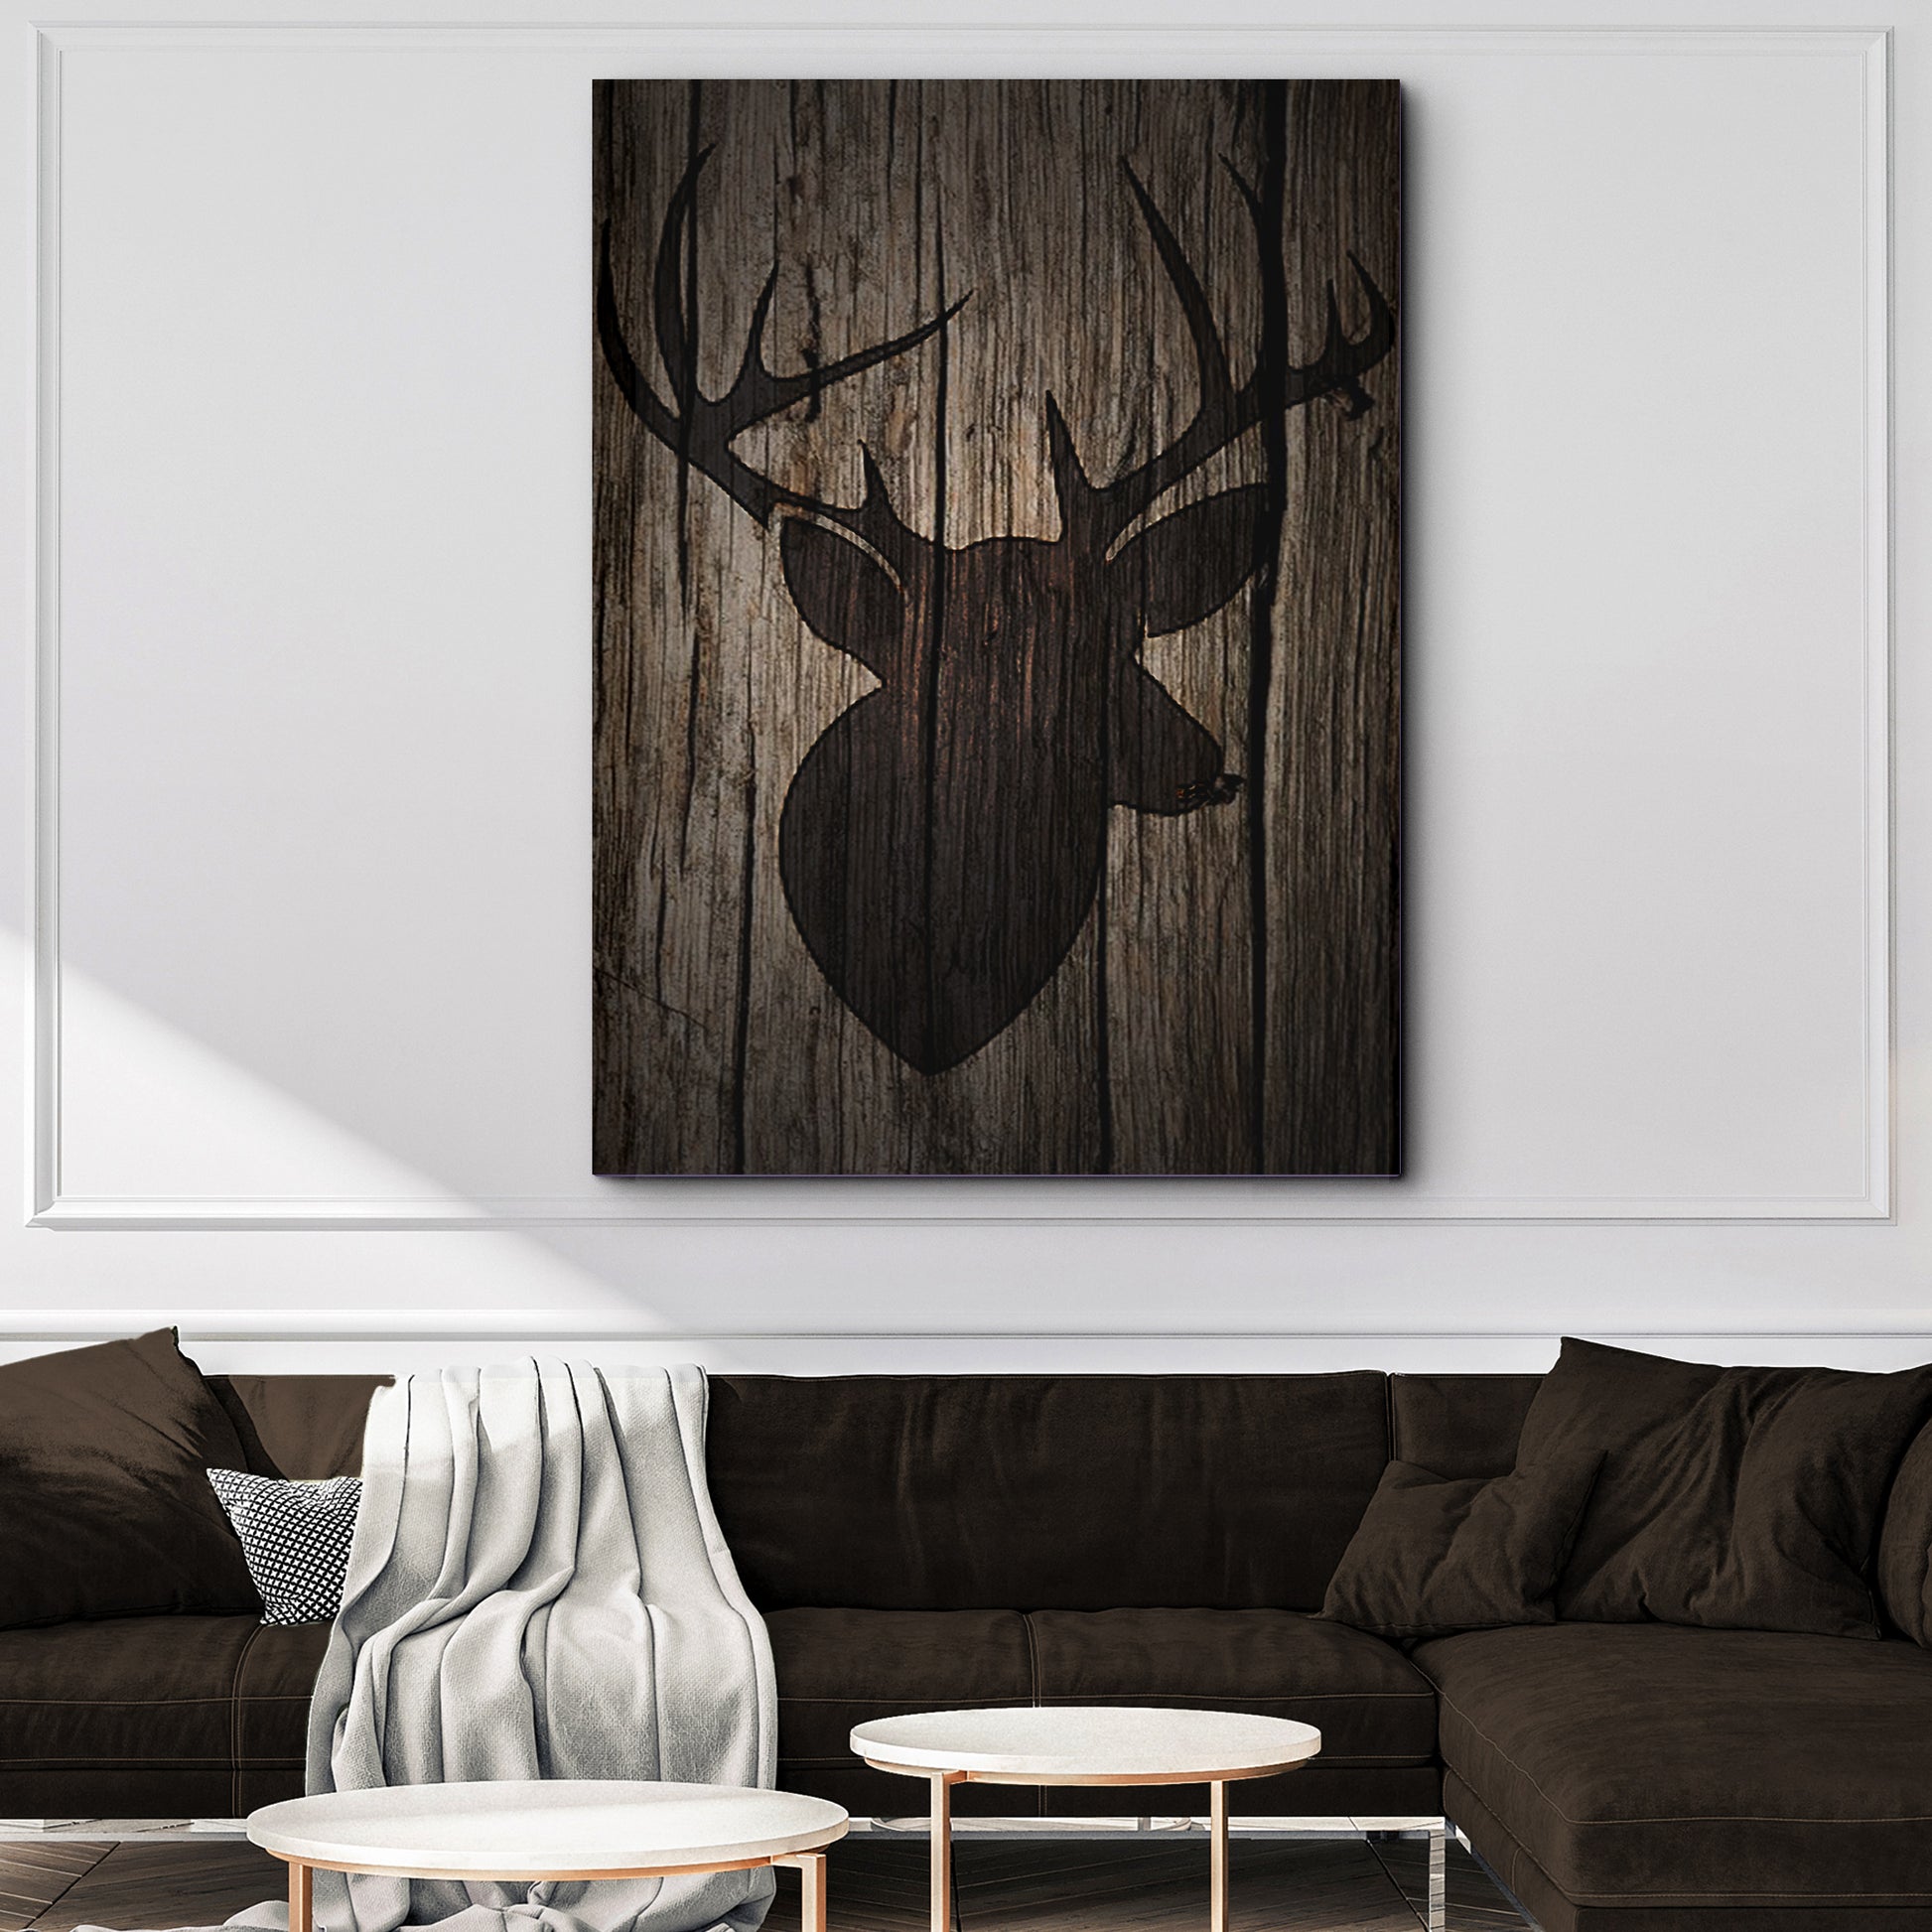 Rustic Deer With Antler Silhouette Canvas Wall Art Style 2 - Image by Tailored Canvases